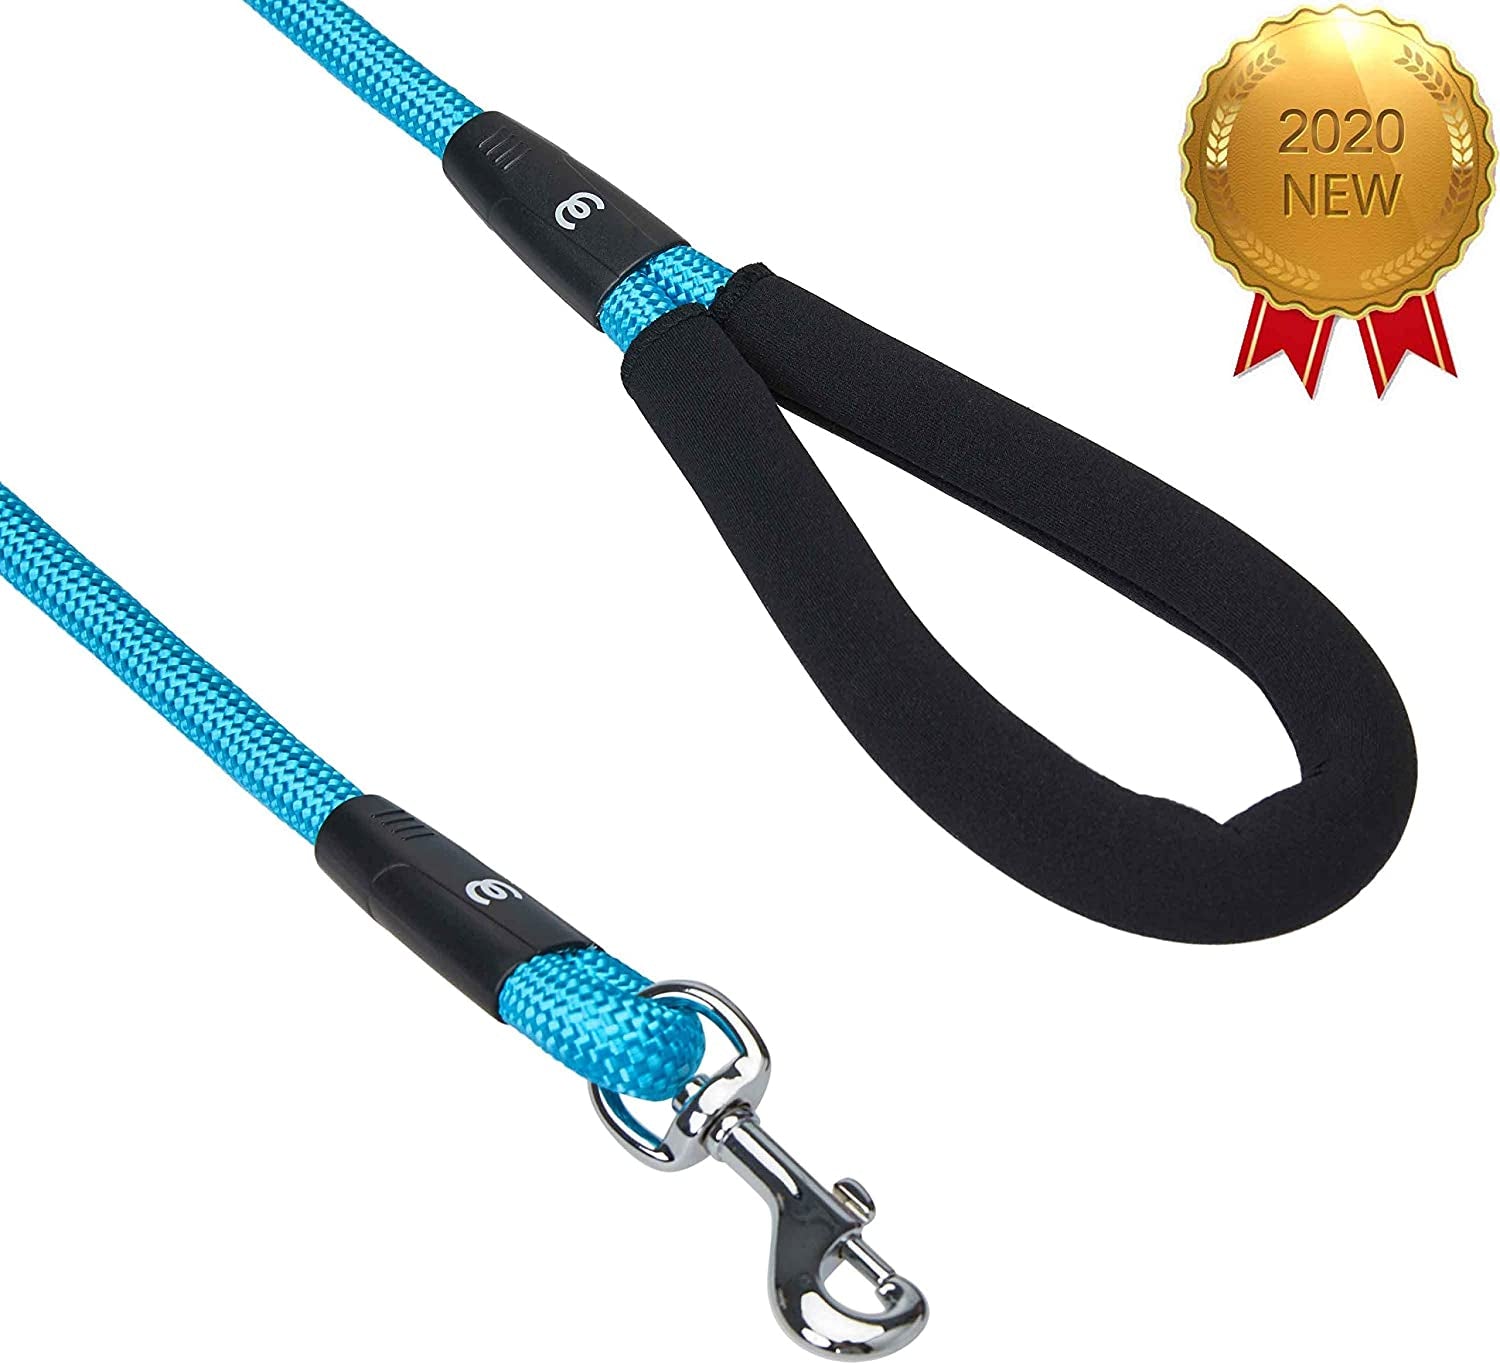 Dog Rope Leash with Comfortable Padded Handle, 4 Ft